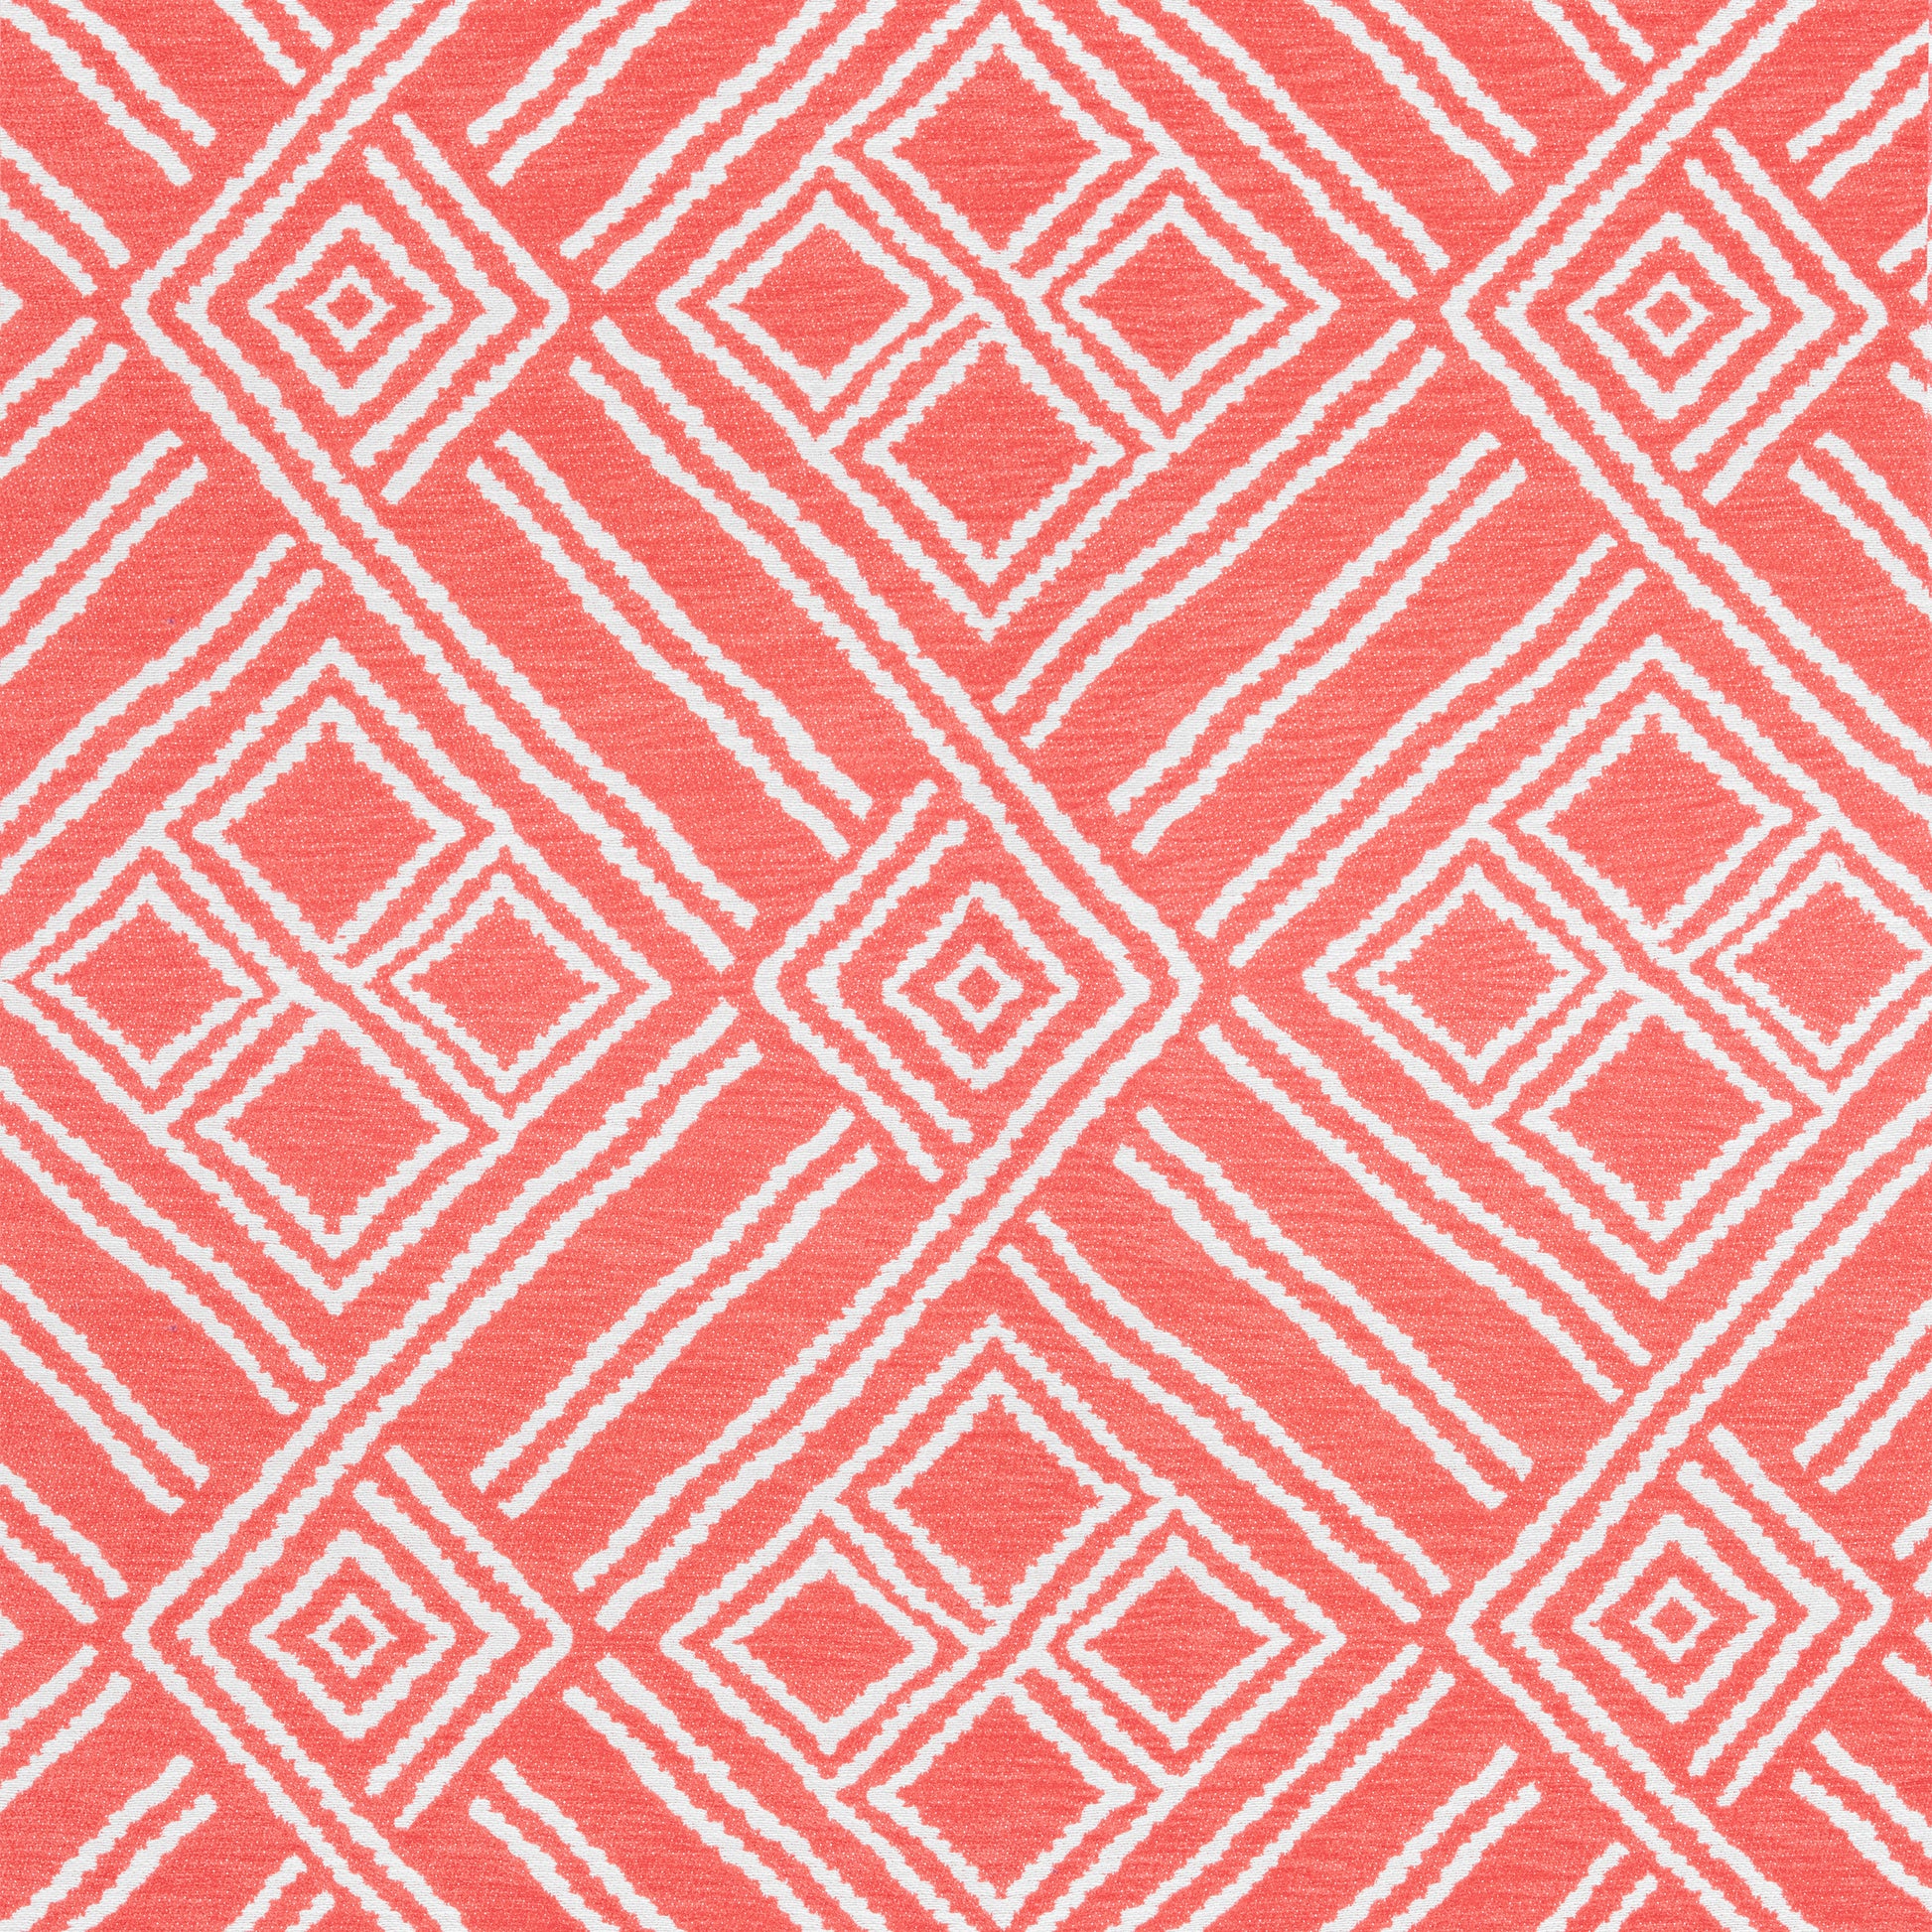 Purchase Thibaut Fabric Product W8604 pattern name Terraza color Coral